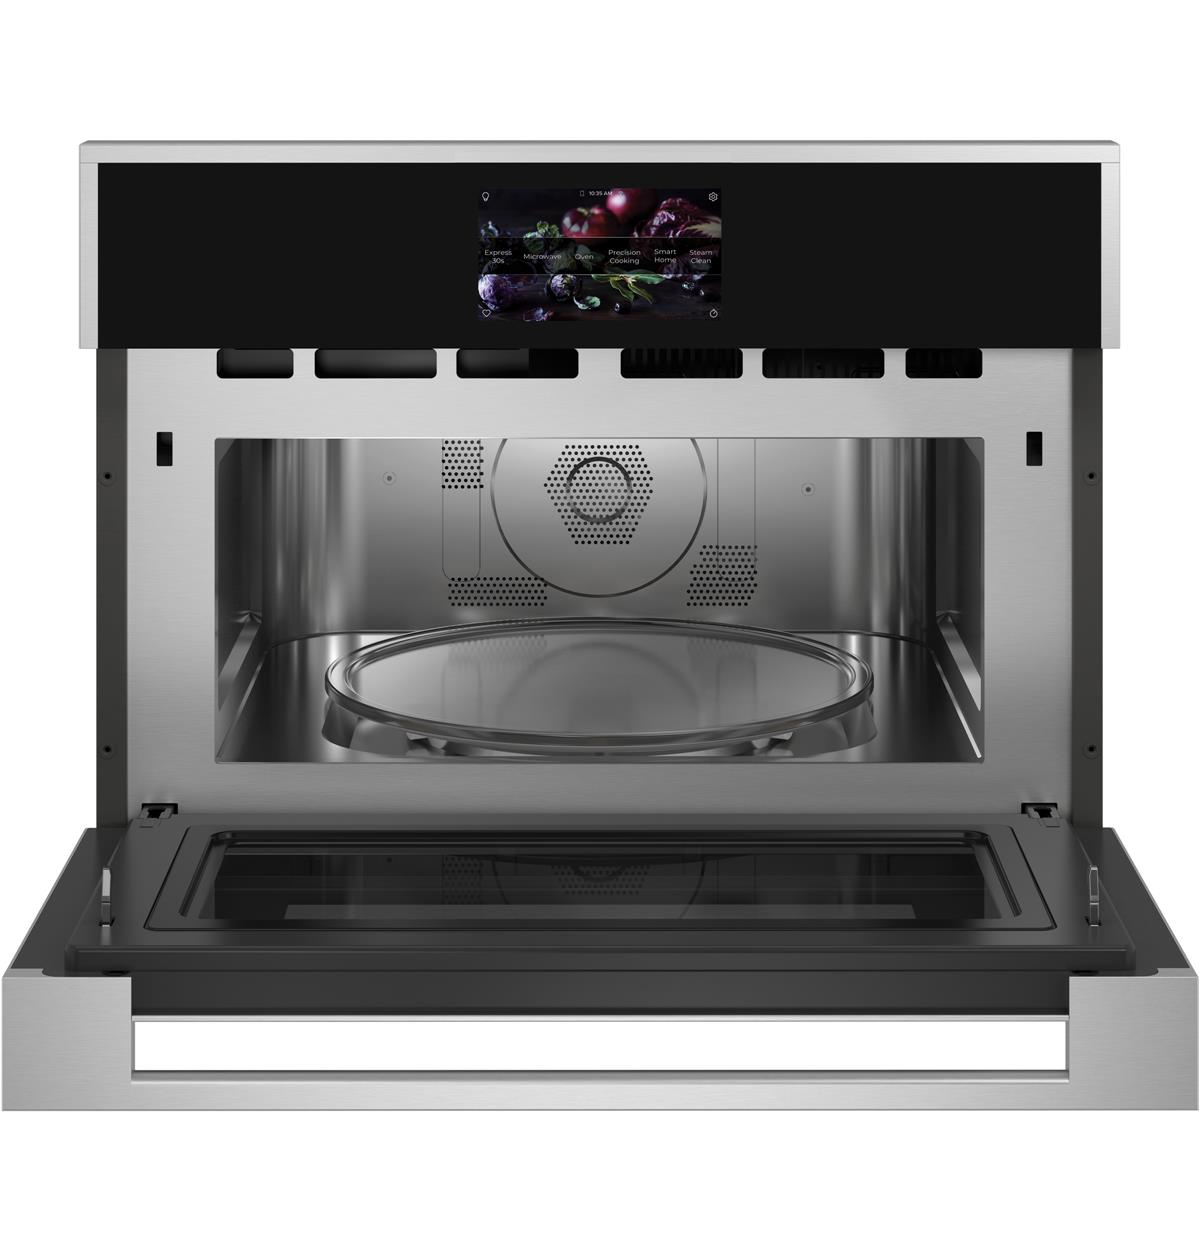 Monogram smart 5-in-1 wall oven with advantium technology